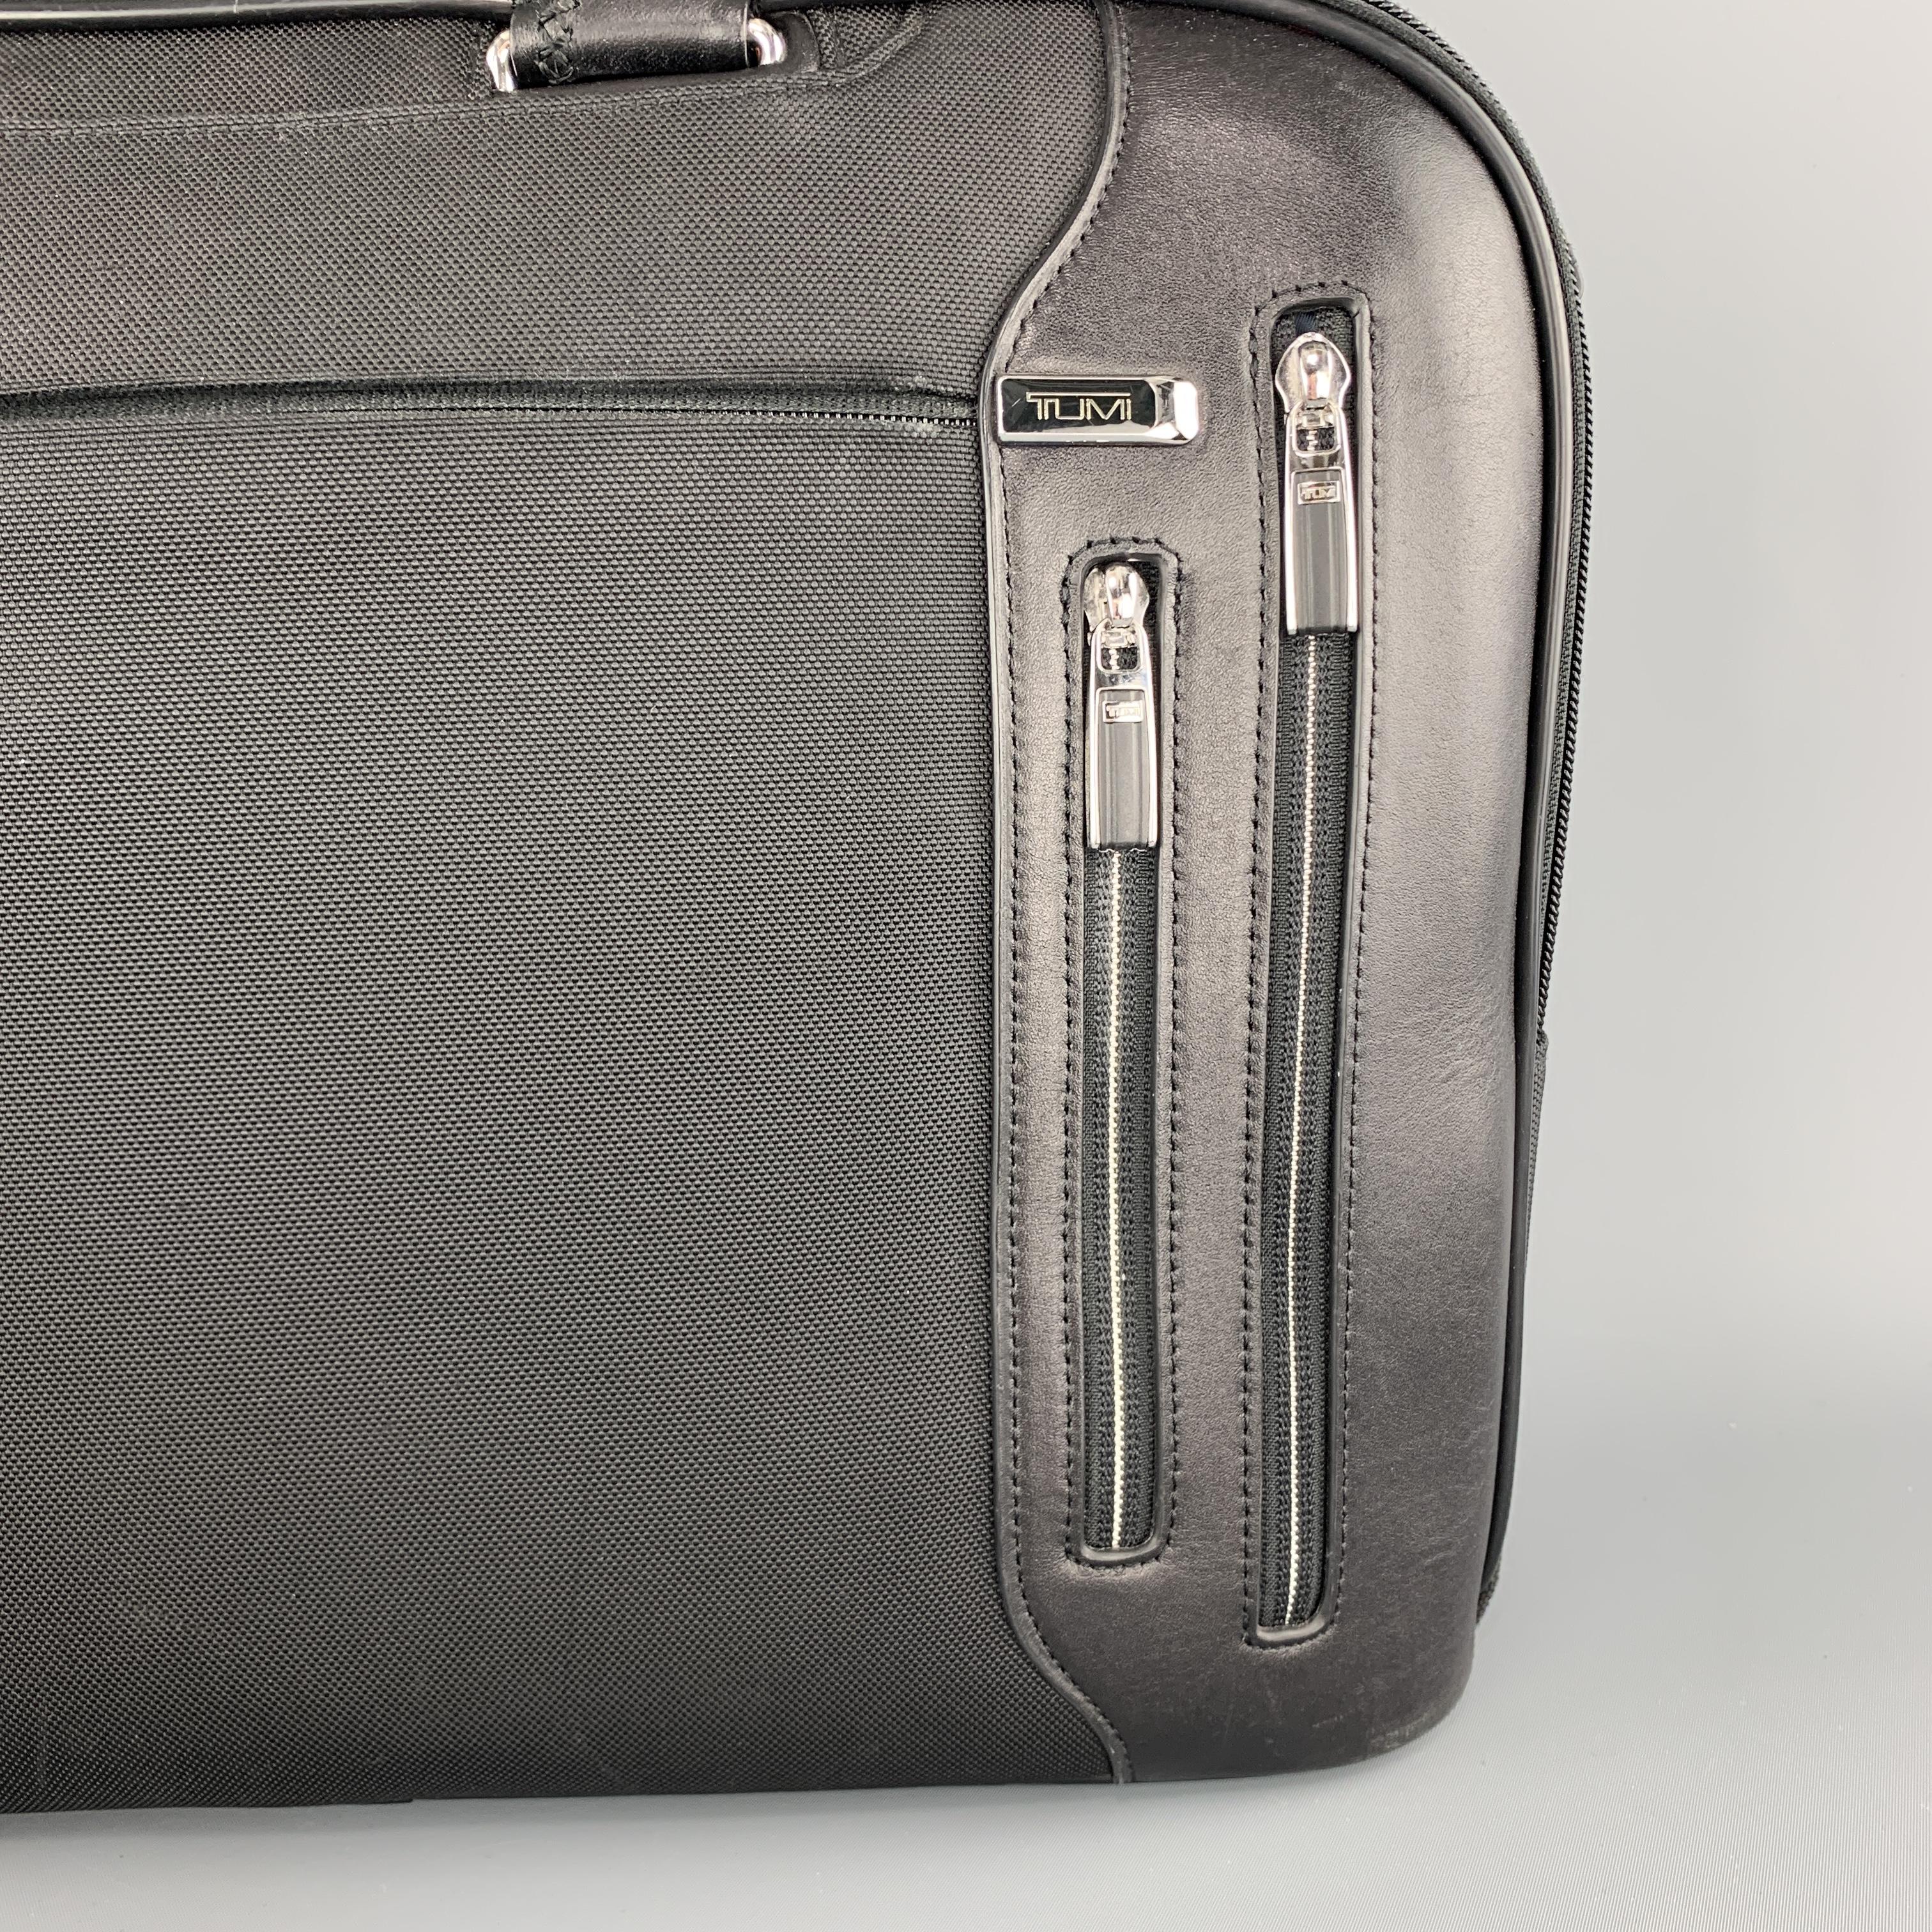  TUMI briefcase laptop bag comes in nylon canvas with leather details, multiple zip pockets, leather double top handles, detachable strap, multi section interior, and pencil case. 

Very Good Pre-Owned Condition.

Measurements:

Length: 17